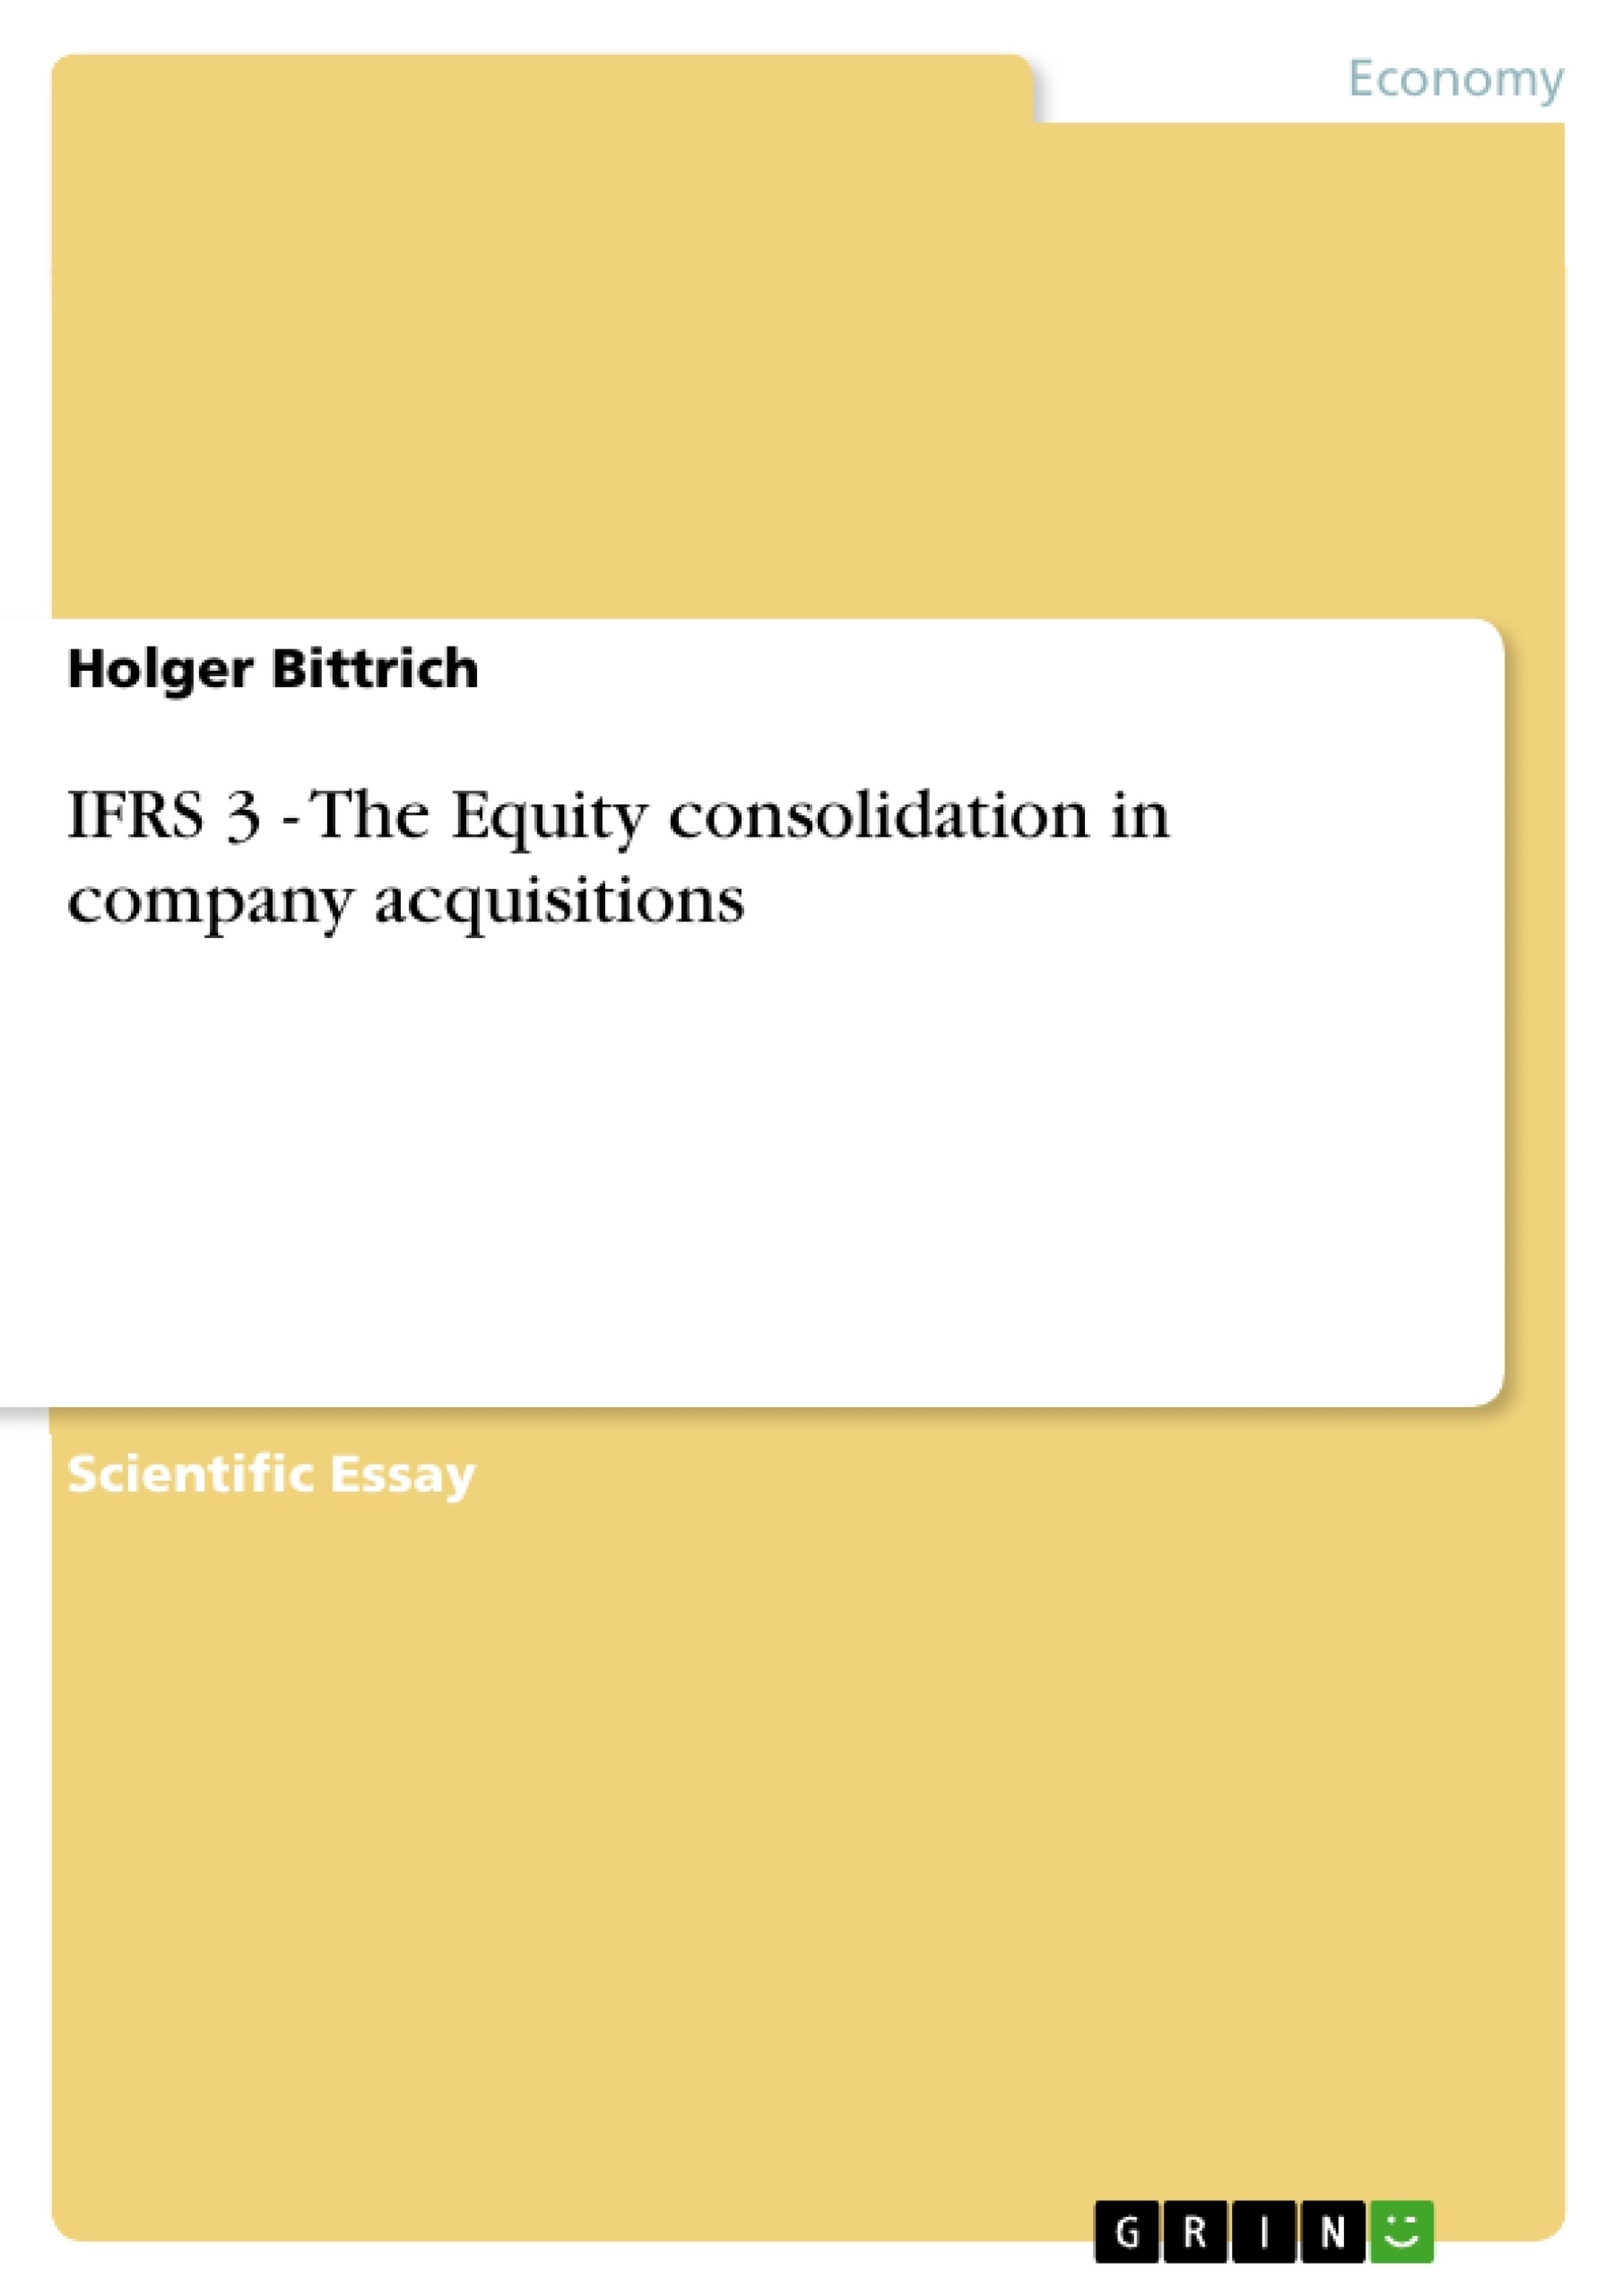 Titre: IFRS 3 - The Equity consolidation in company acquisitions